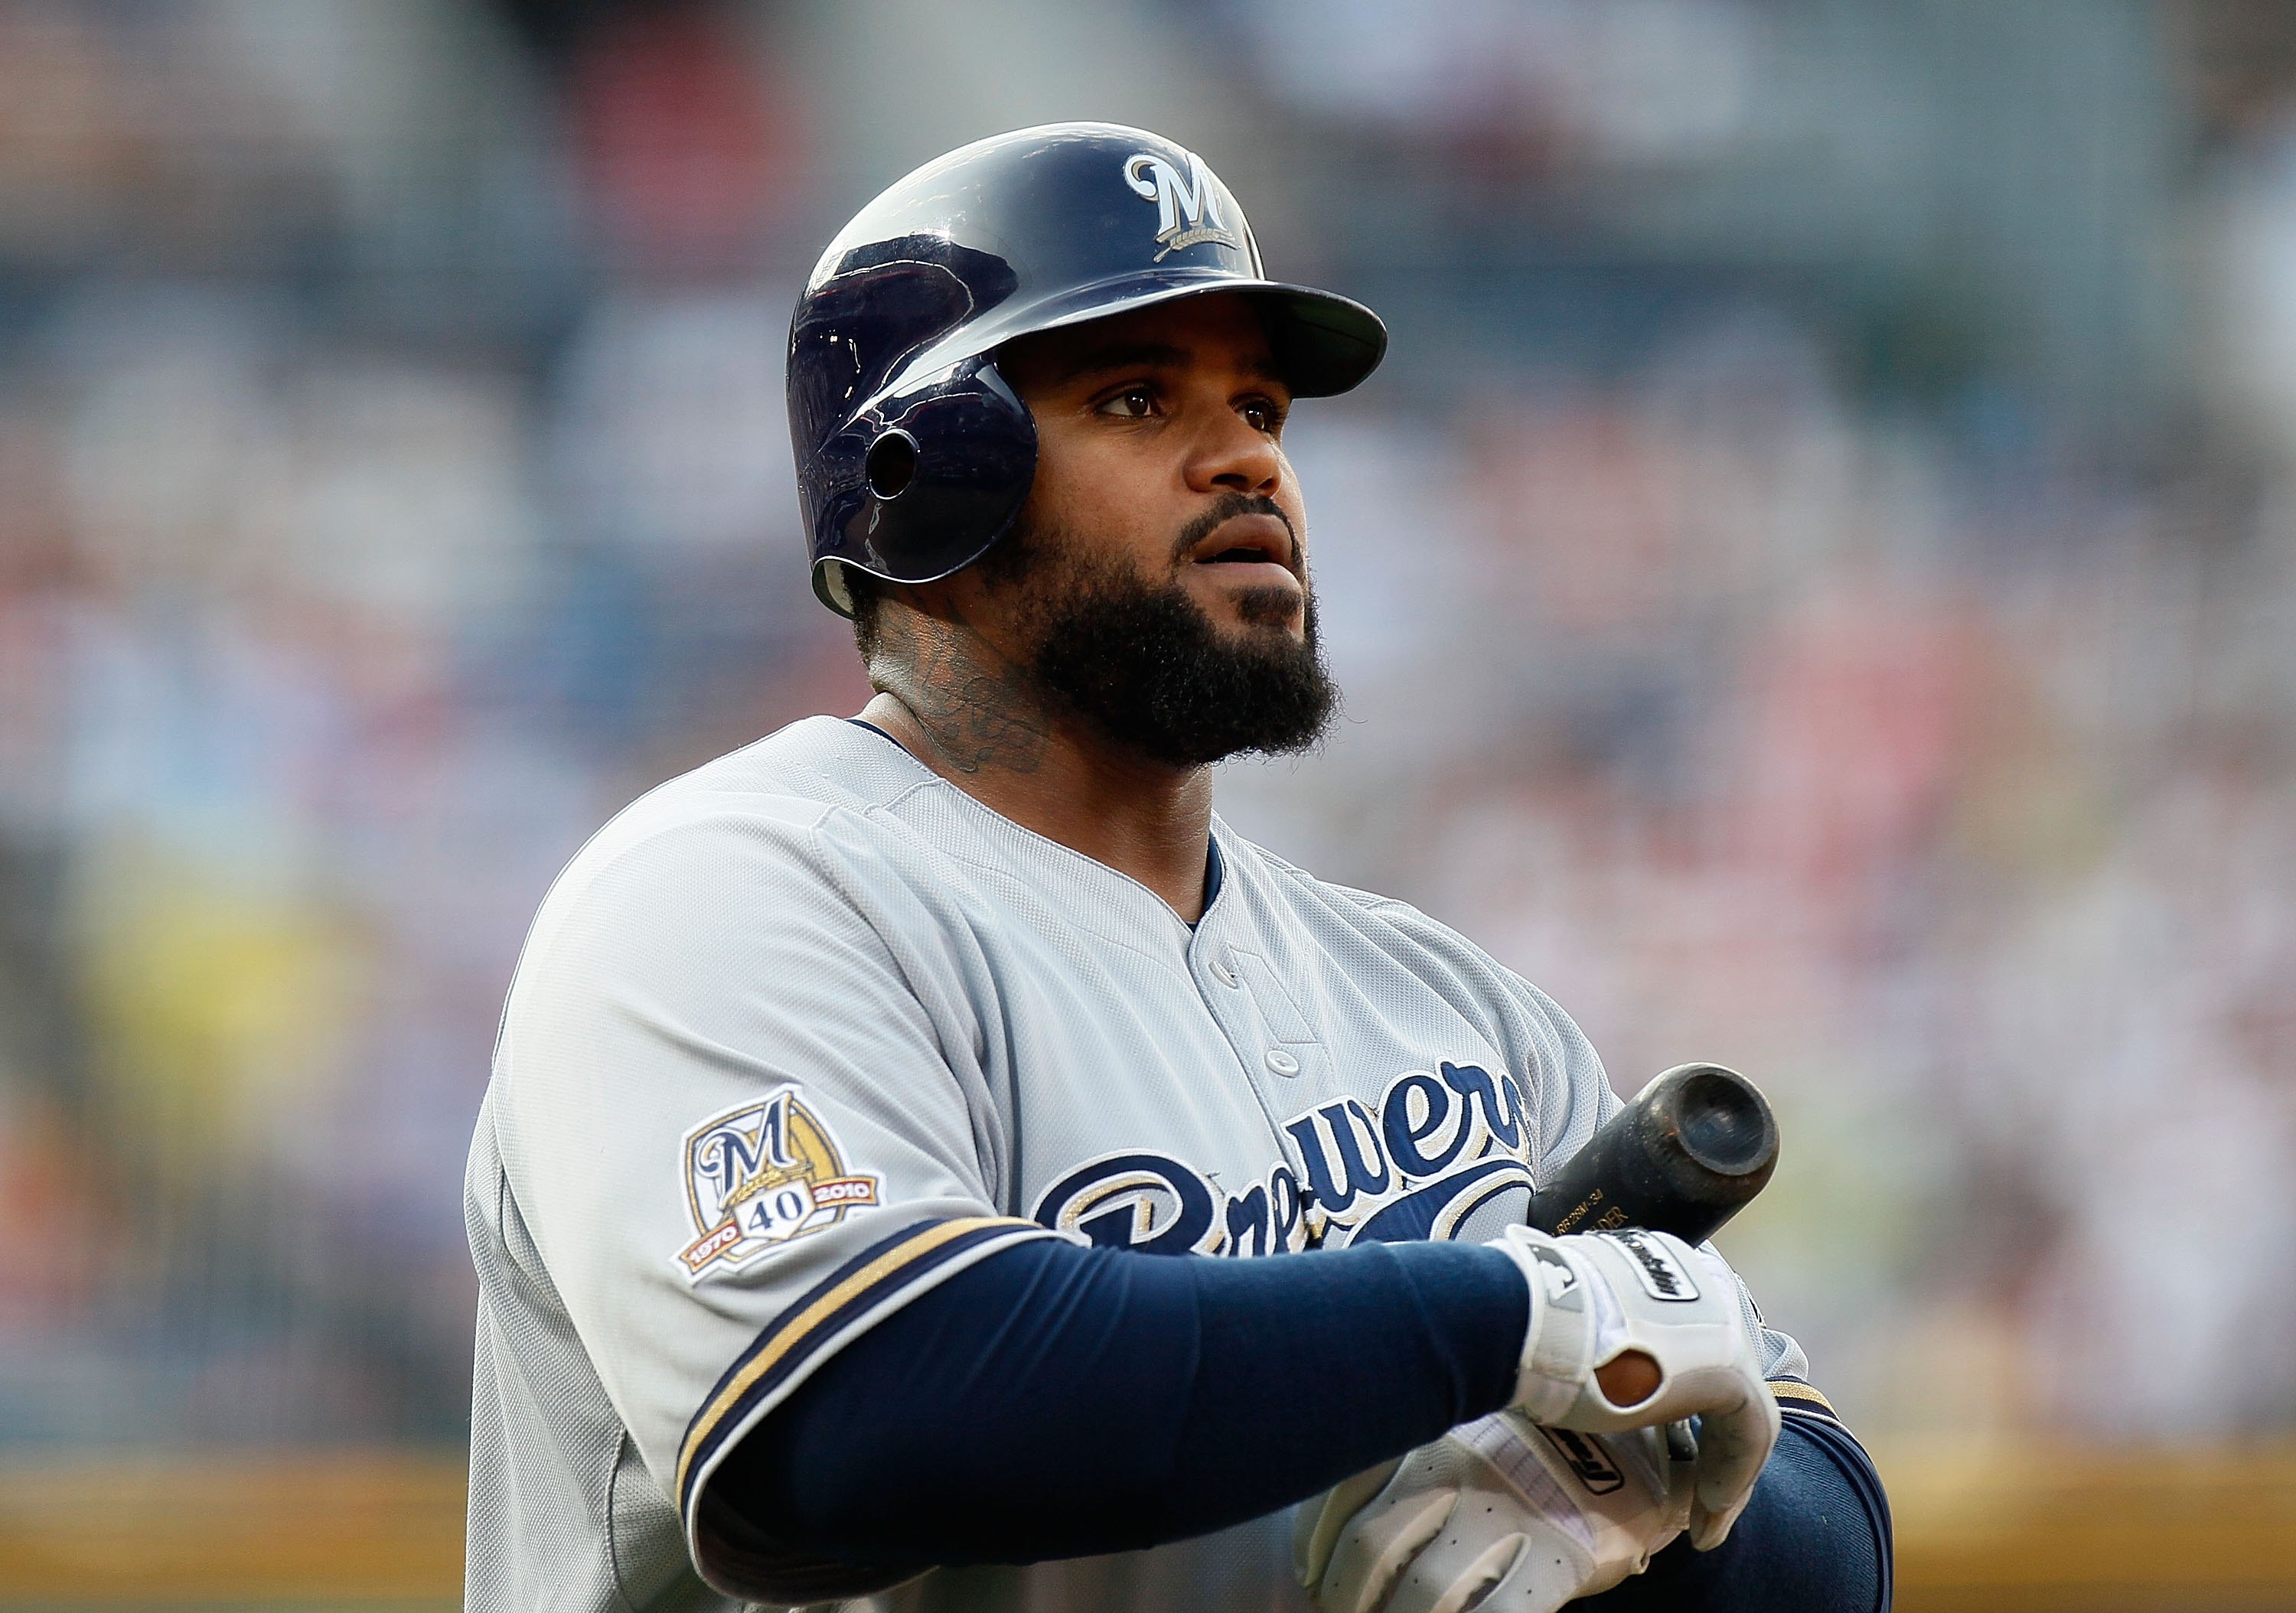 ATLANTA - JULY 15:  Prince Fielder #28 of the Milwaukee Brewers against the Atlanta Braves at Turner Field on July 15, 2010 in Atlanta, Georgia.  (Photo by Kevin C. Cox/Getty Images)